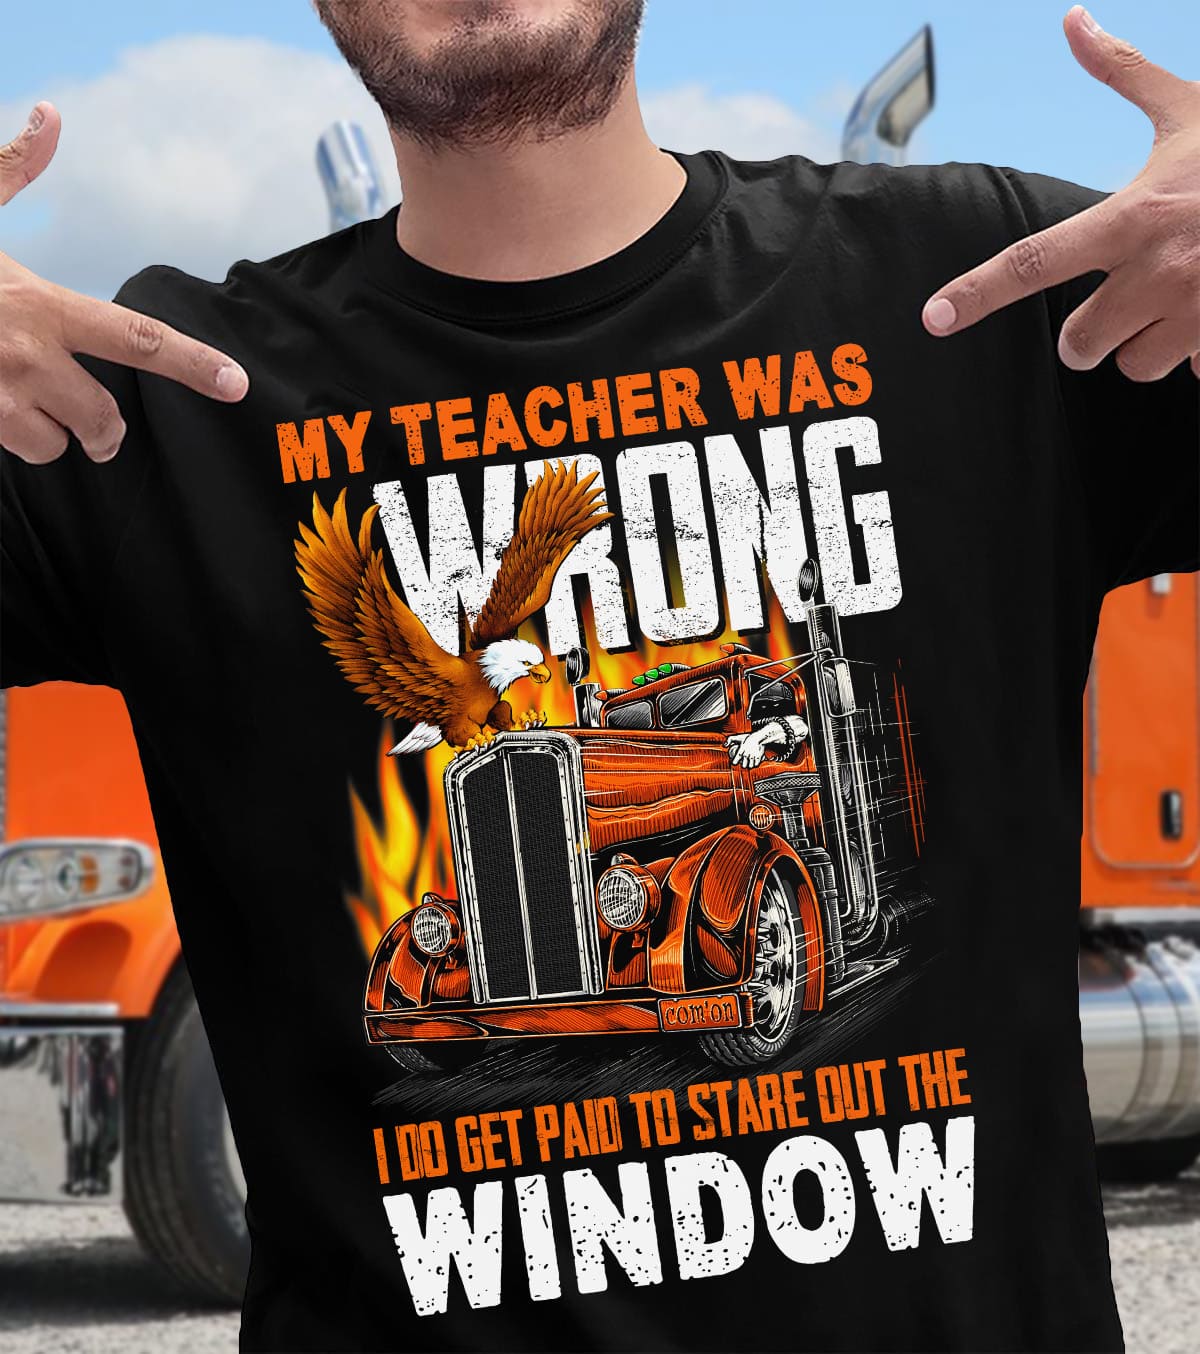 My teacher was wrong, I do get paid to stare out the window - Gift for trucker, trucker and teacher